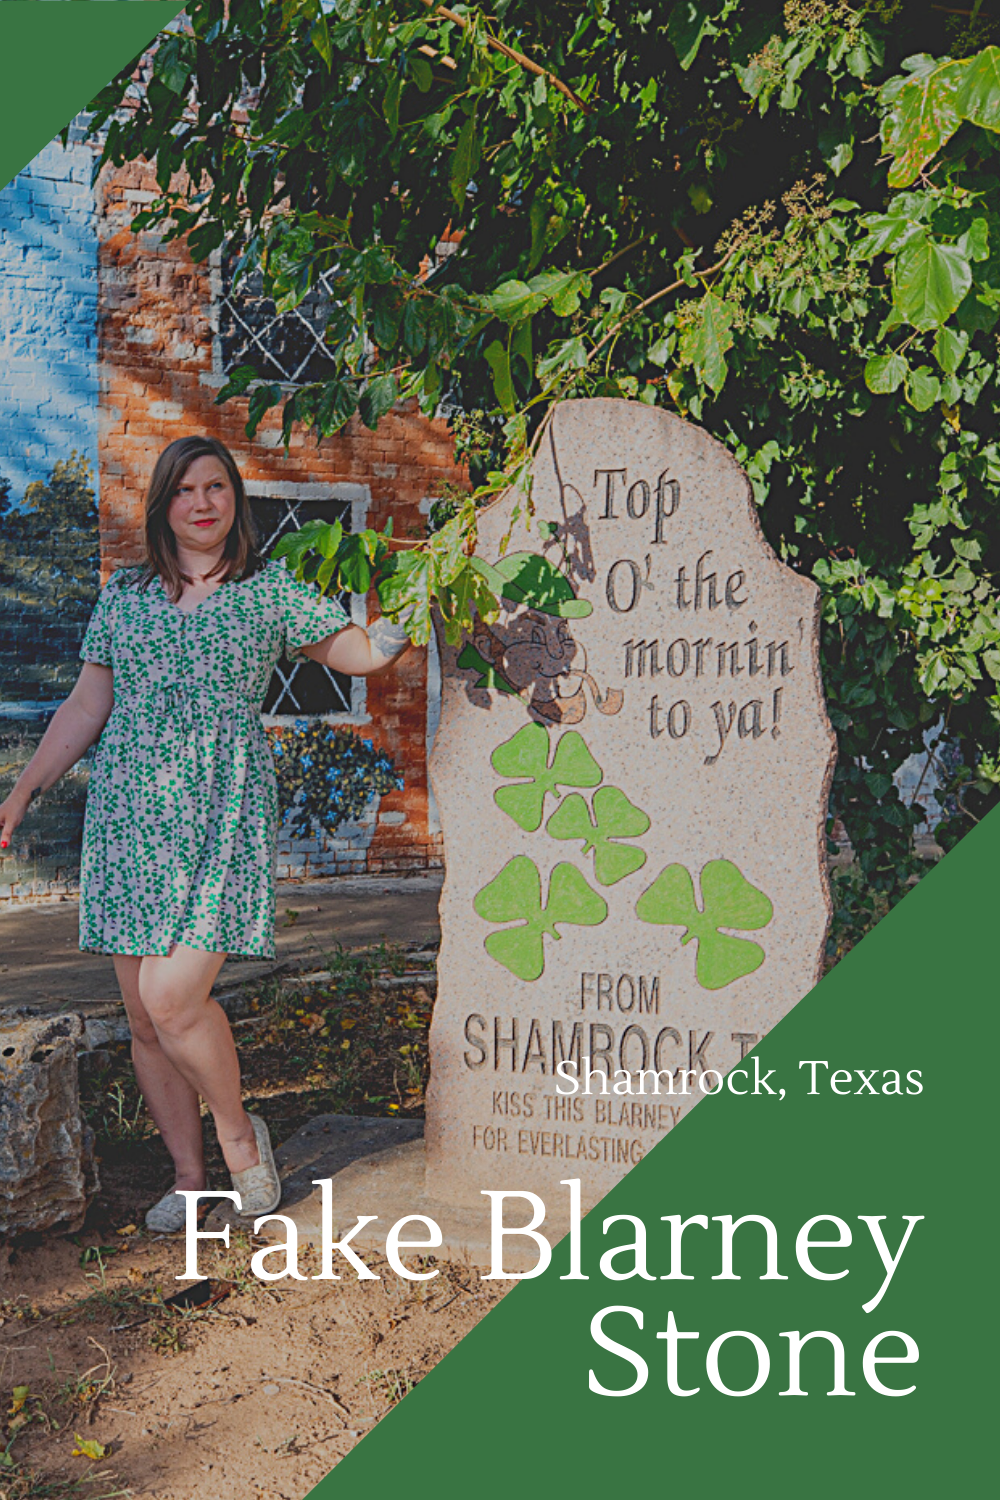 Top O' the mornin to ya from Shamrock, Texas! This small town on Route 66 celebrates its Irish heritage in many ways. And if you're searching for their famed piece of Ireland's Blarney Stone...this isn't it. But this Fake Blarney Stone is still a roadside attraction worth seeking out. But maybe not worth kissing.   #RoadTrips #RoadTripStop #Route66 #Route66RoadTrip #TexasRoute66 #Texas #TexasRoadTrip #TexasRoadsideAttractions #RoadsideAttractions #RoadsideAttraction #RoadsideAmerica #RoadTrip 